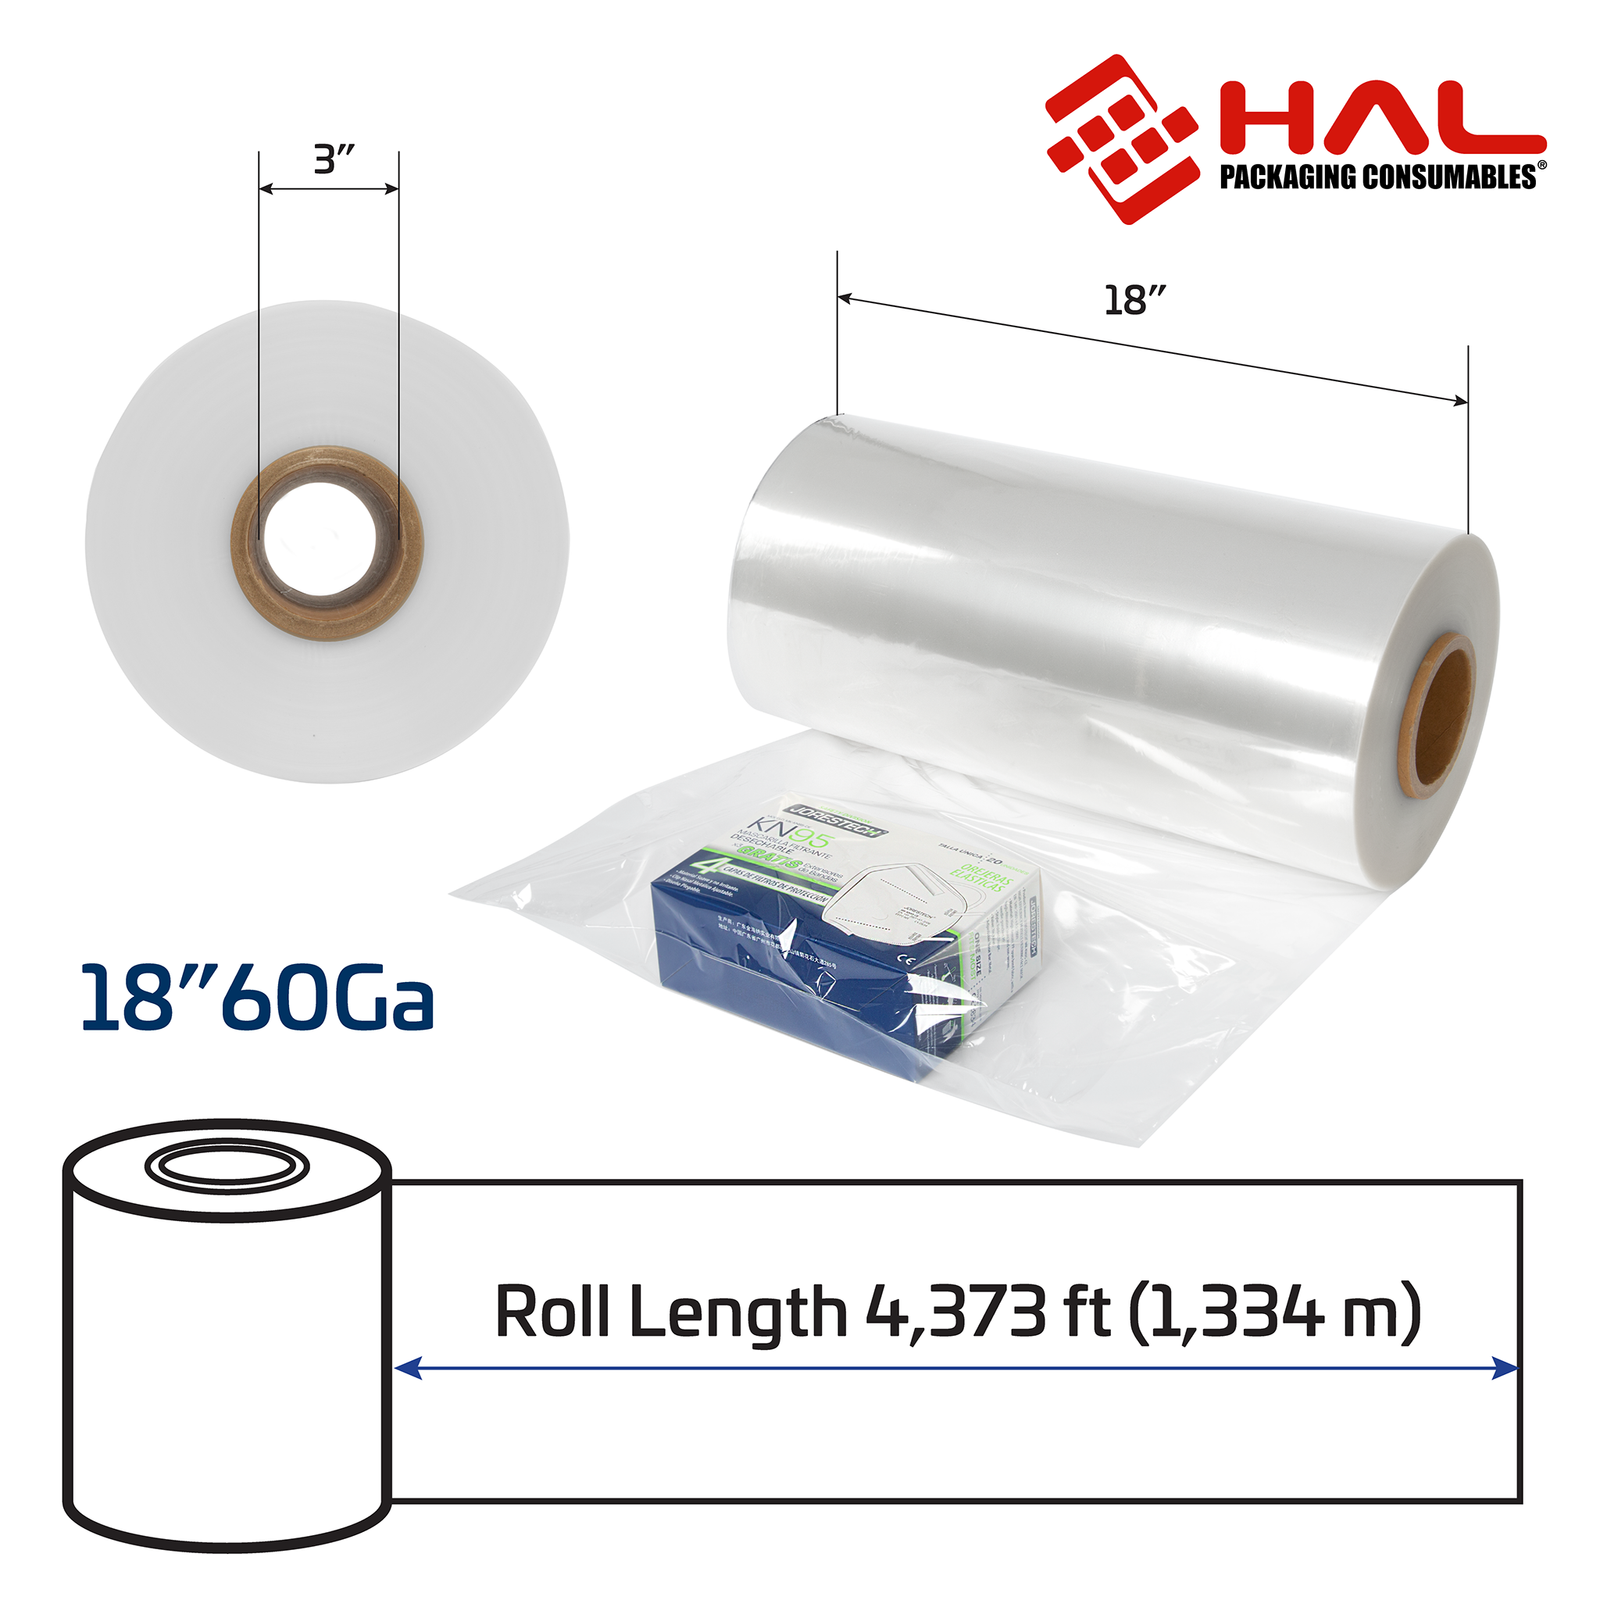 Measurements of the 60 gauge shrink wrapping film tube. 3 inch diameter of the inner core, and 18 inch width with a 4,373 ft. length.